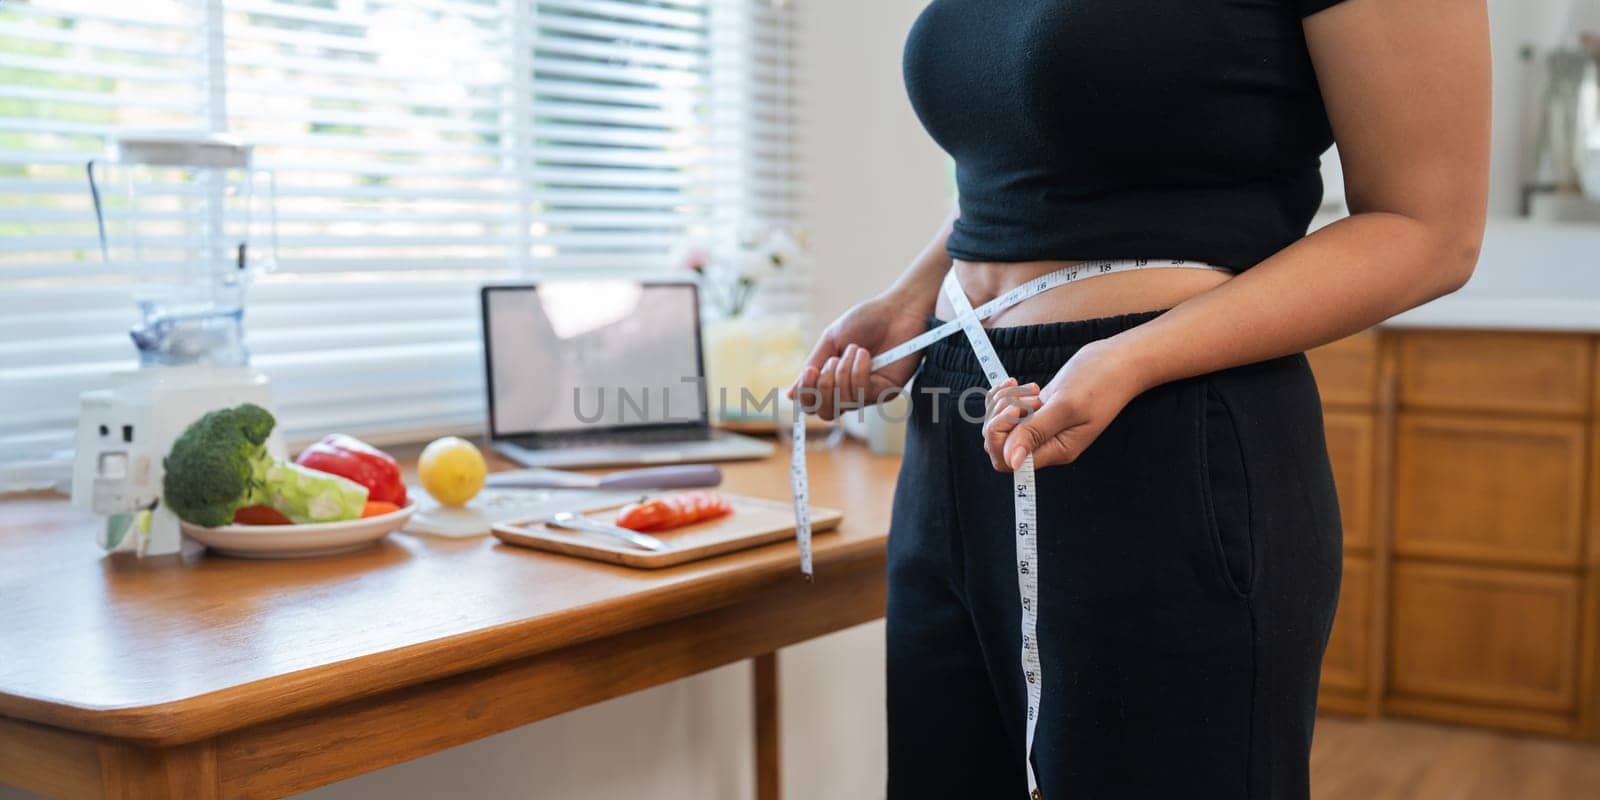 Young woman asian measure her waist in the kitchen the with vegetables and fruits. Concept of healthy eating and dieting.